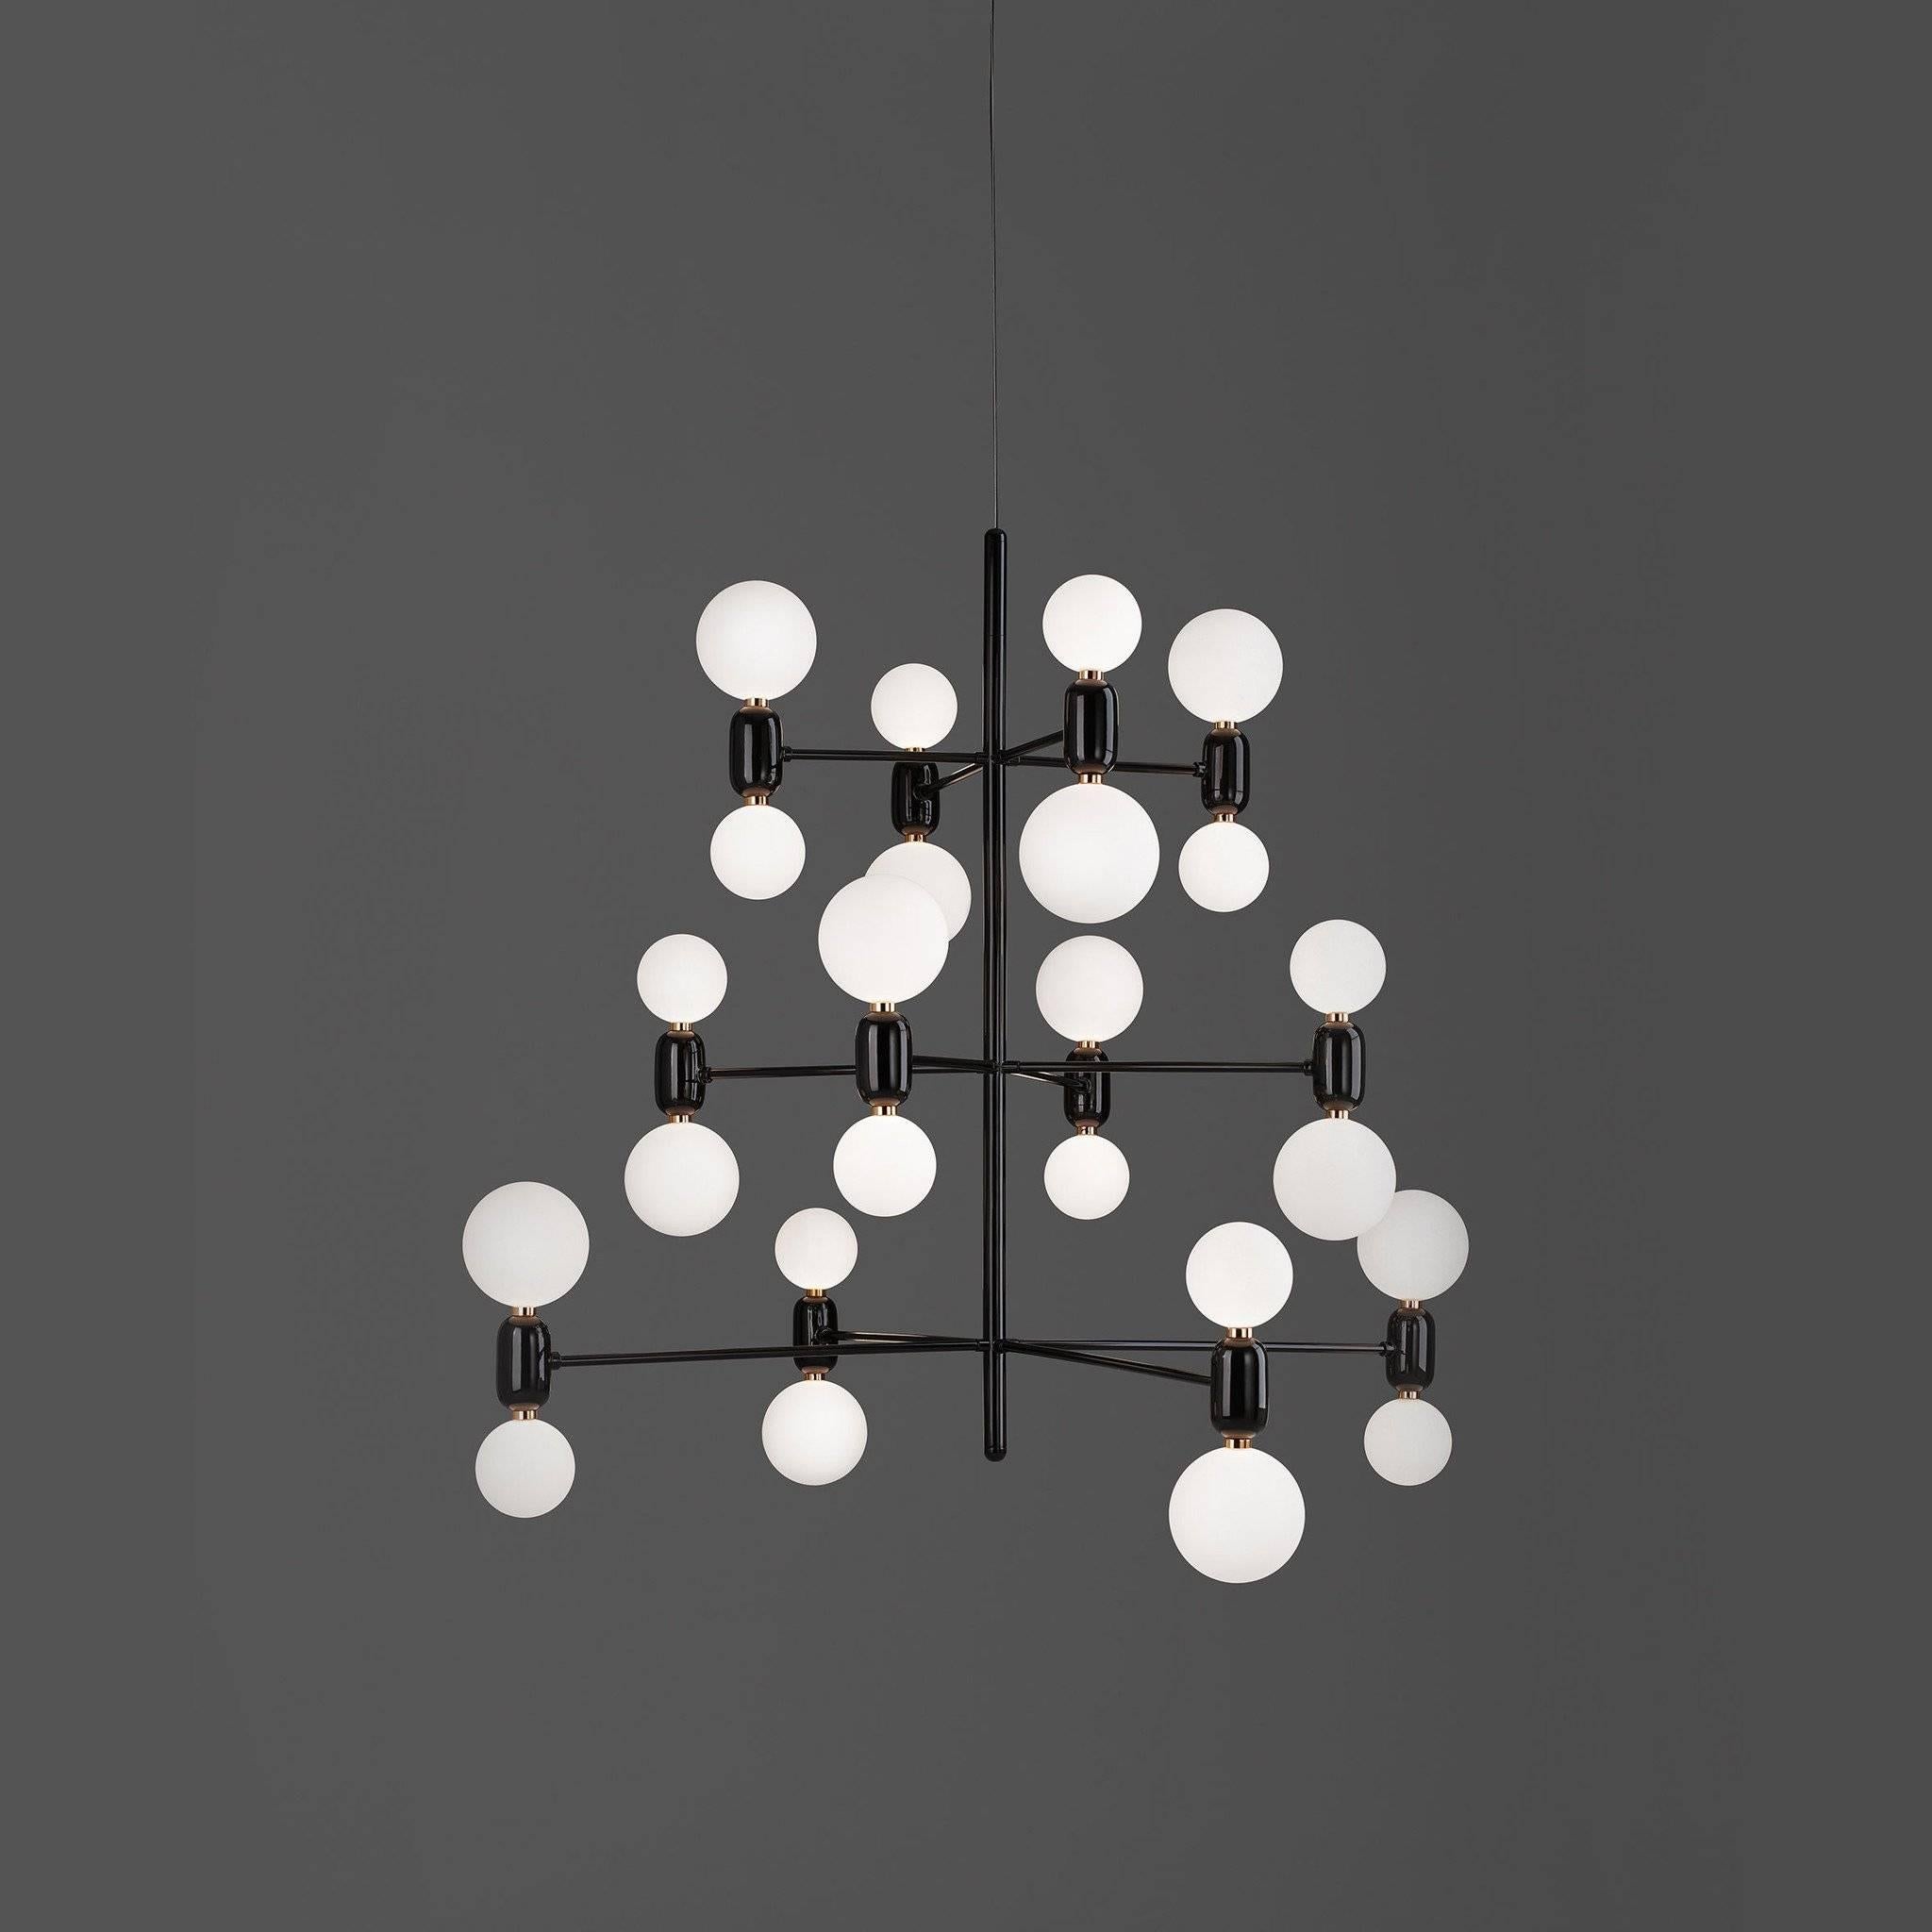 The chandelier showcases a lacquered steel structure matching the color of the 24 blown glass diffusers ceramic bodies completing the fixture. The result is a set of strongly decorative objects that produce a warm ambient light and can be used in a